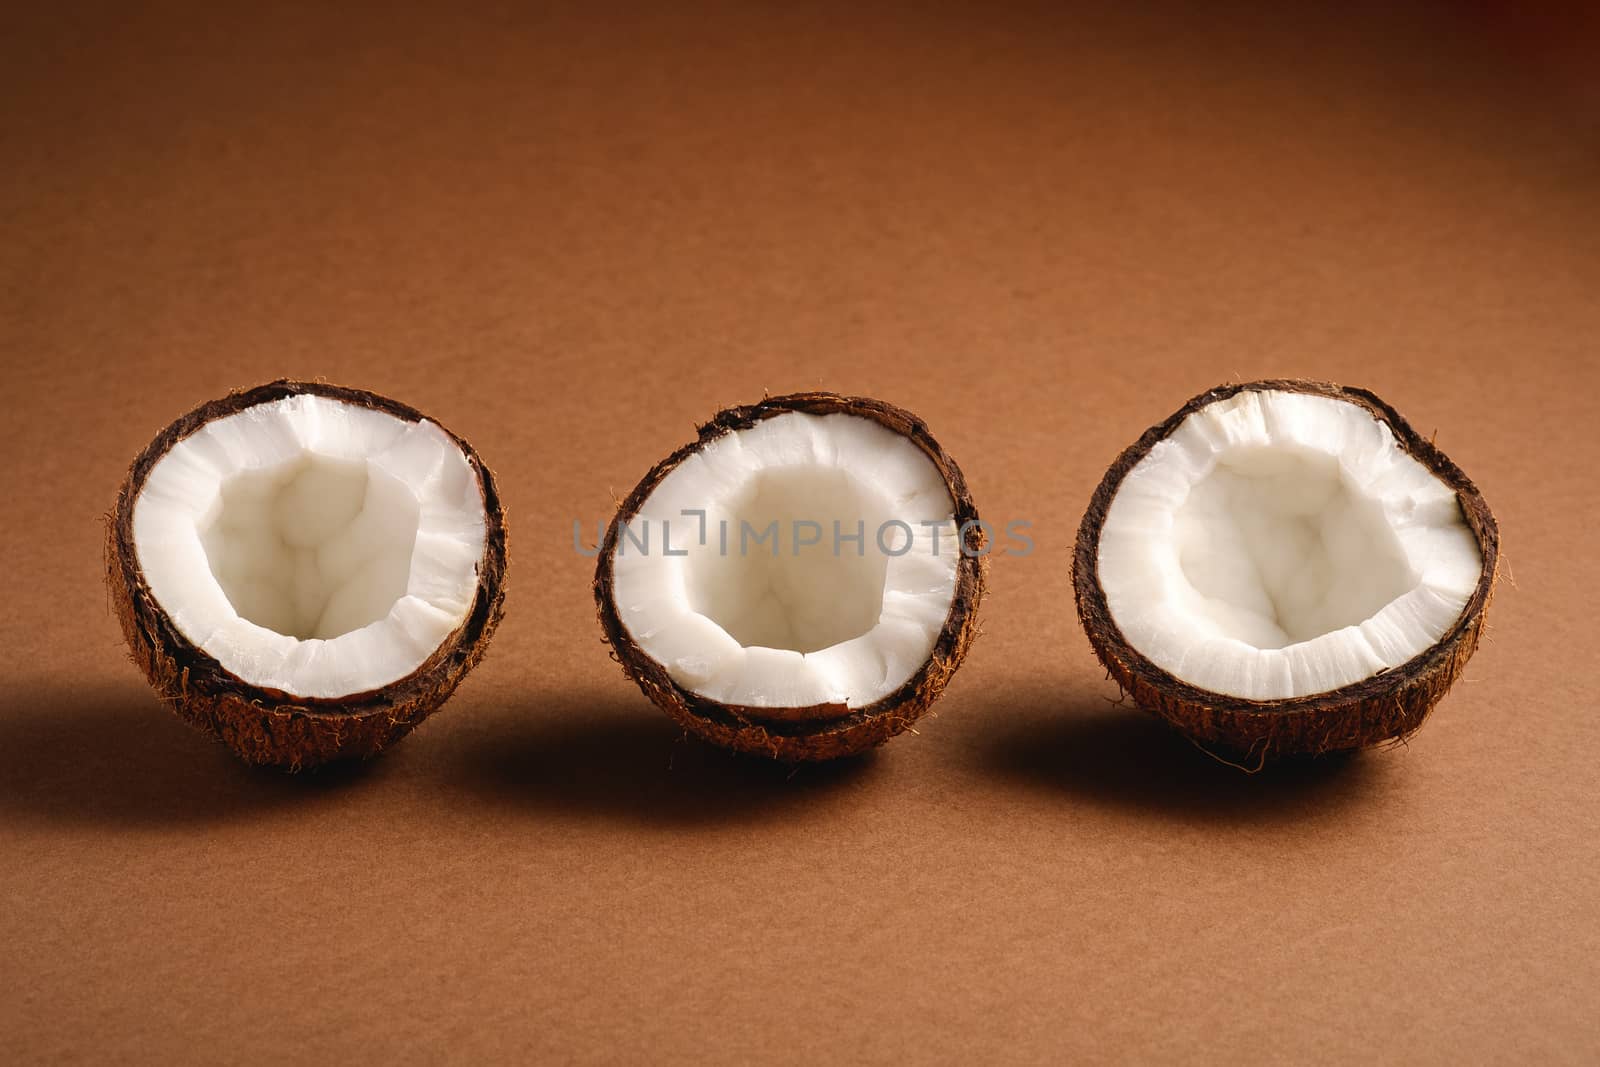 Three coconut fruits in row on brown plain background, abstract food tropical concept, angle view